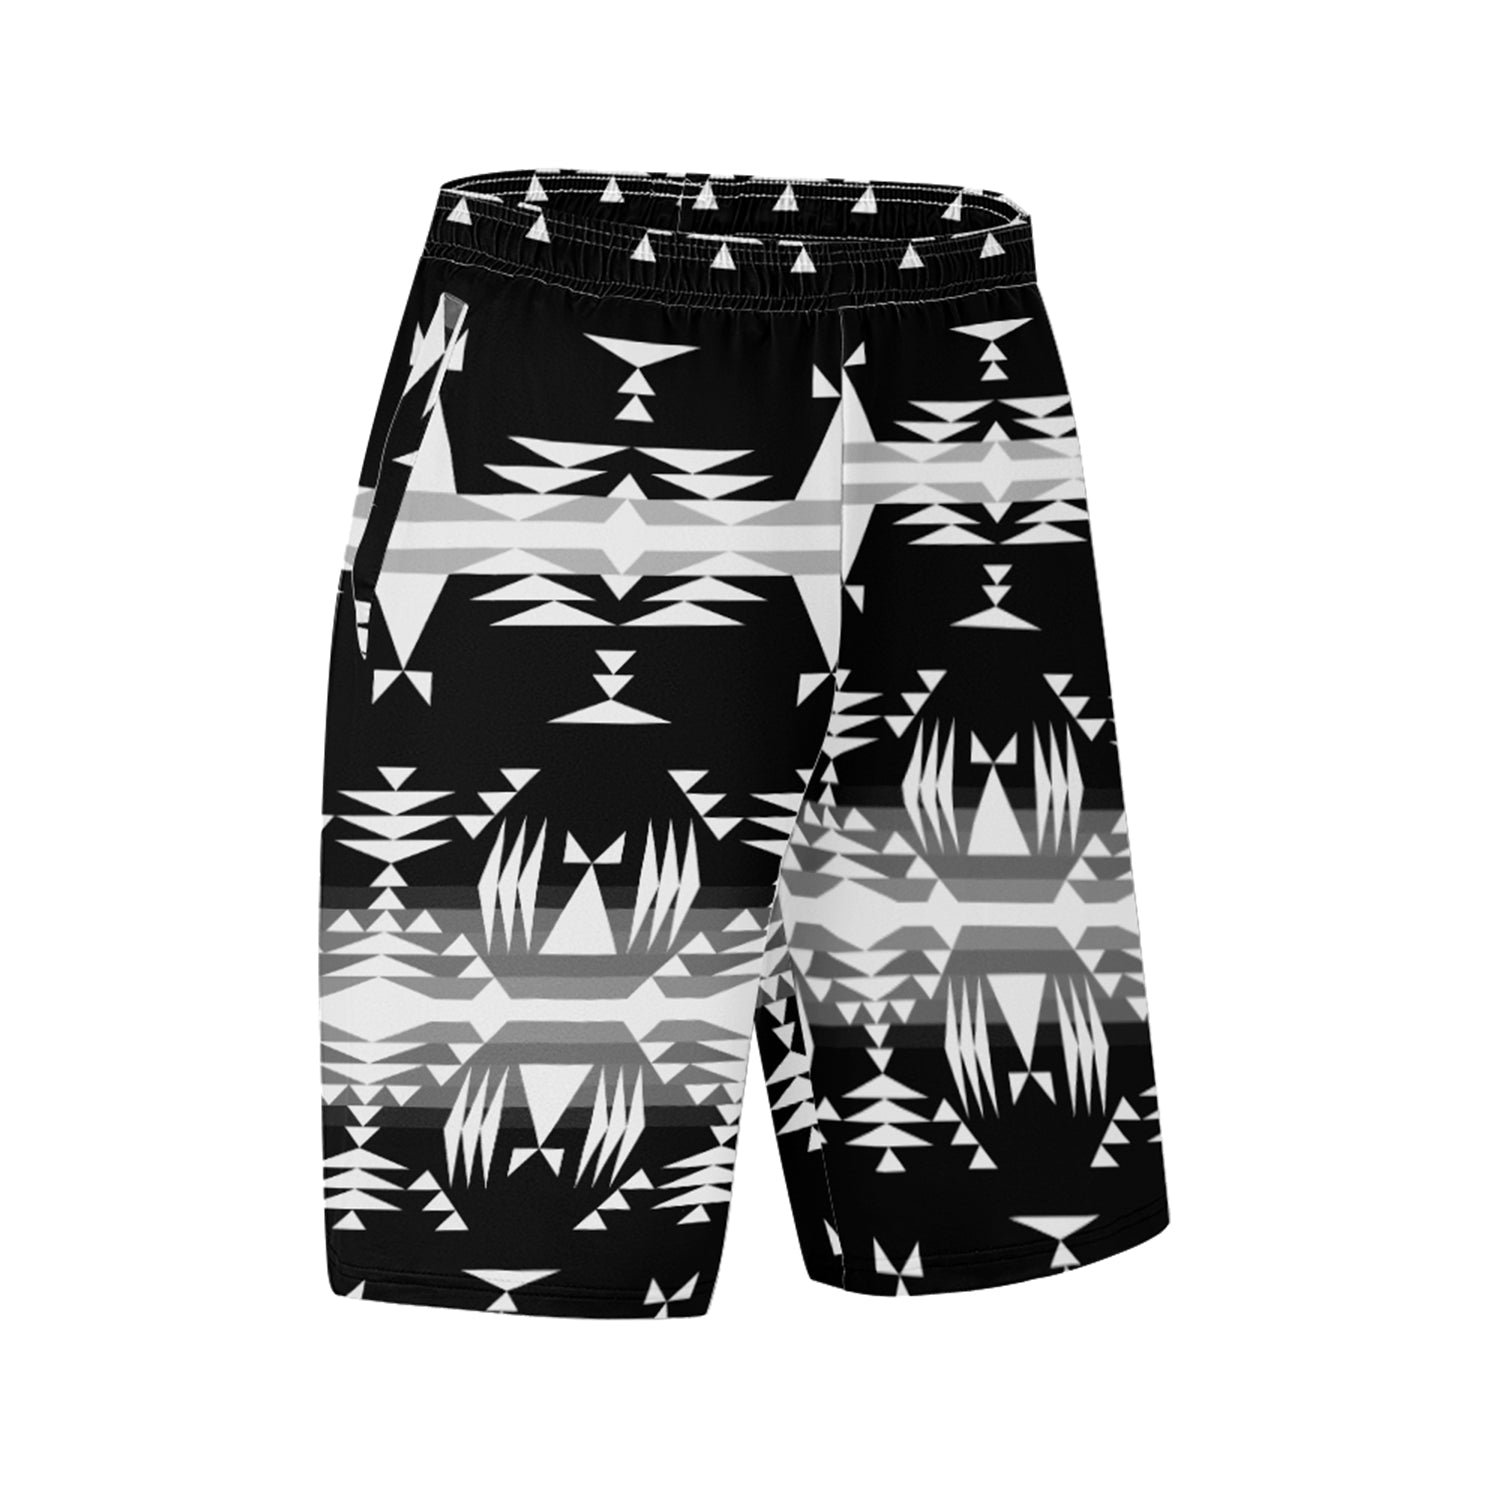 Between the Mountains Black and White Athletic Shorts with Pockets